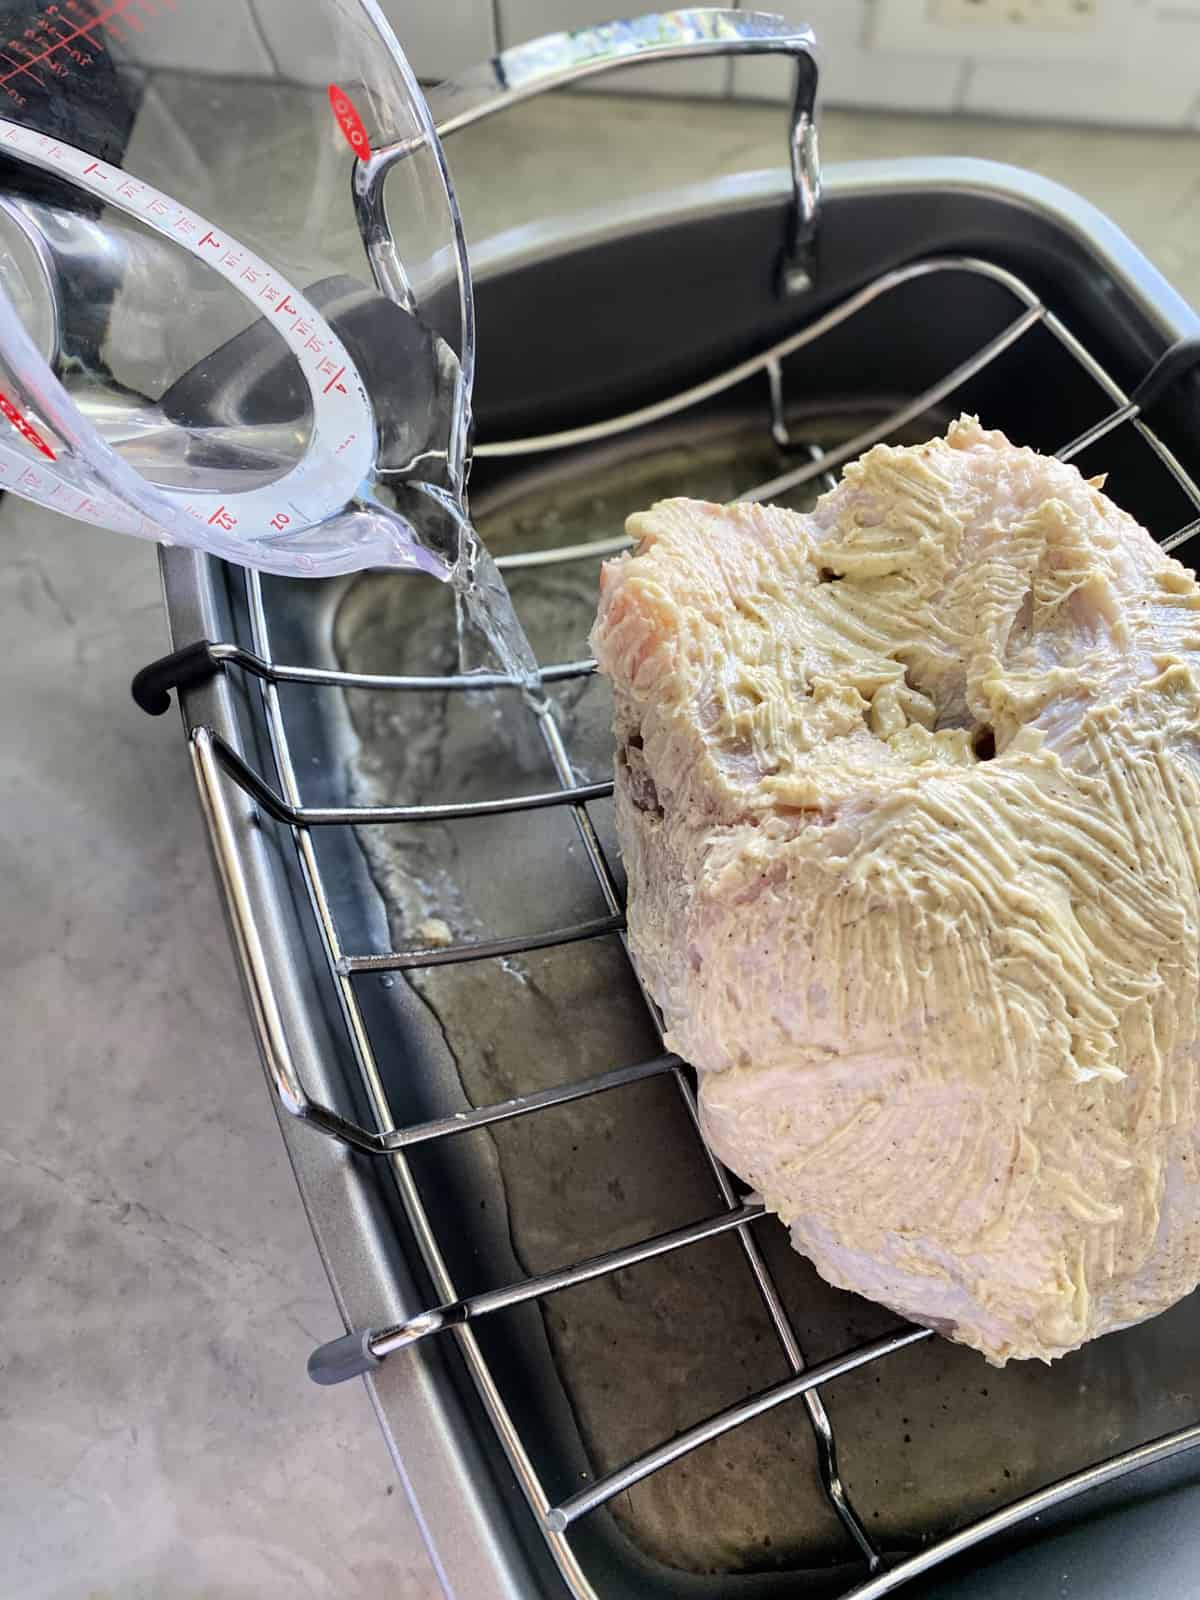 https://www.katiescucina.com/wp-content/uploads/2020/11/Oven-Roasted-Turkey-Breast-with-water.jpg